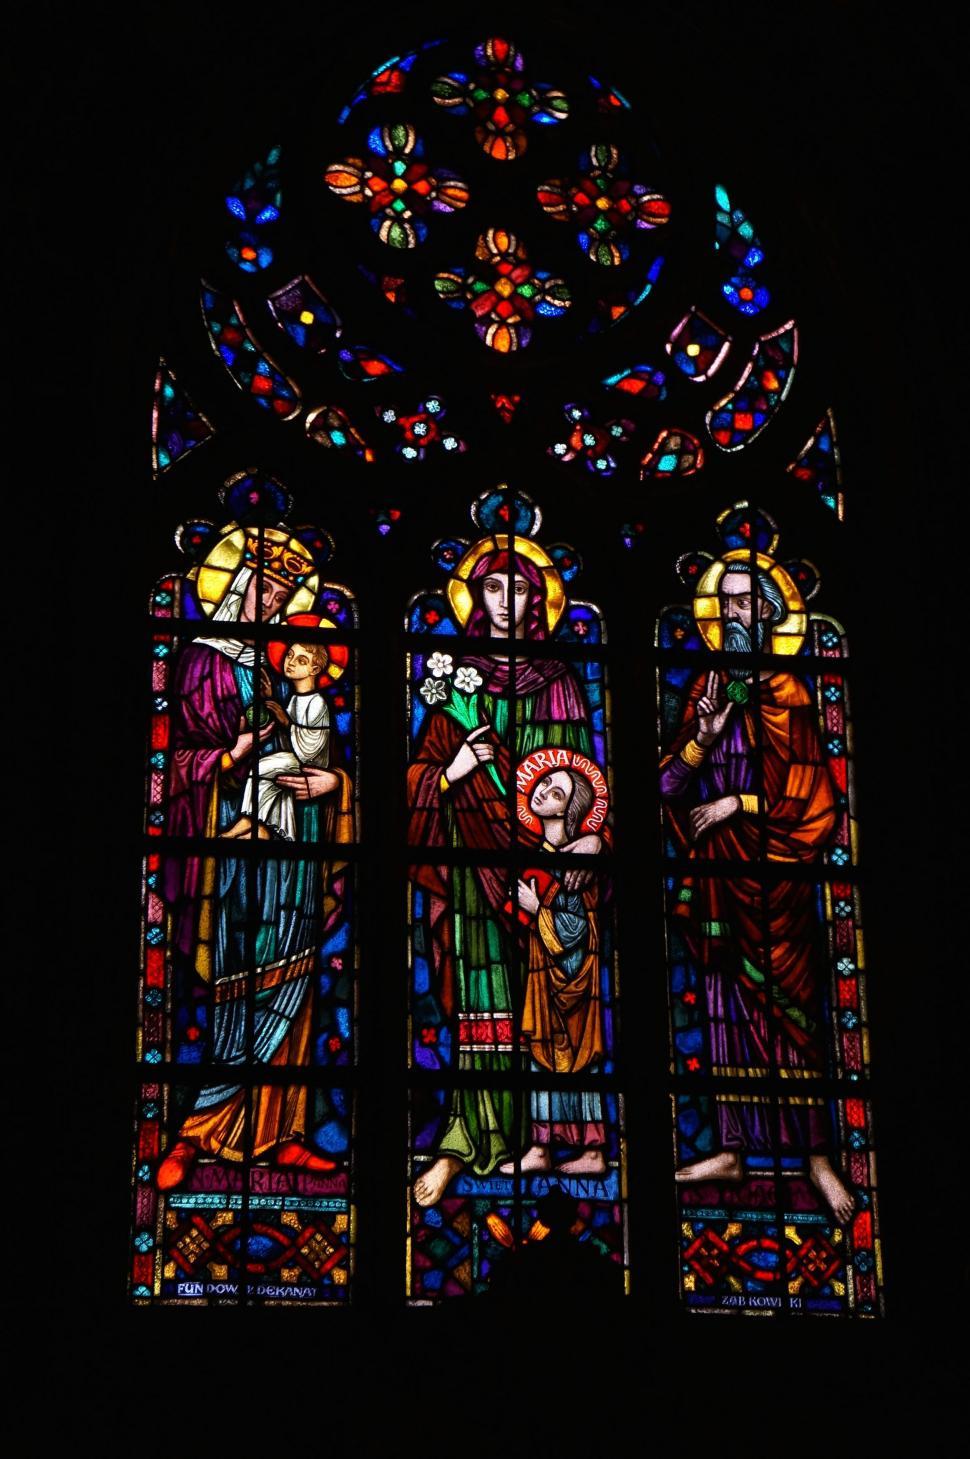 Free Image of Stained-glass window 